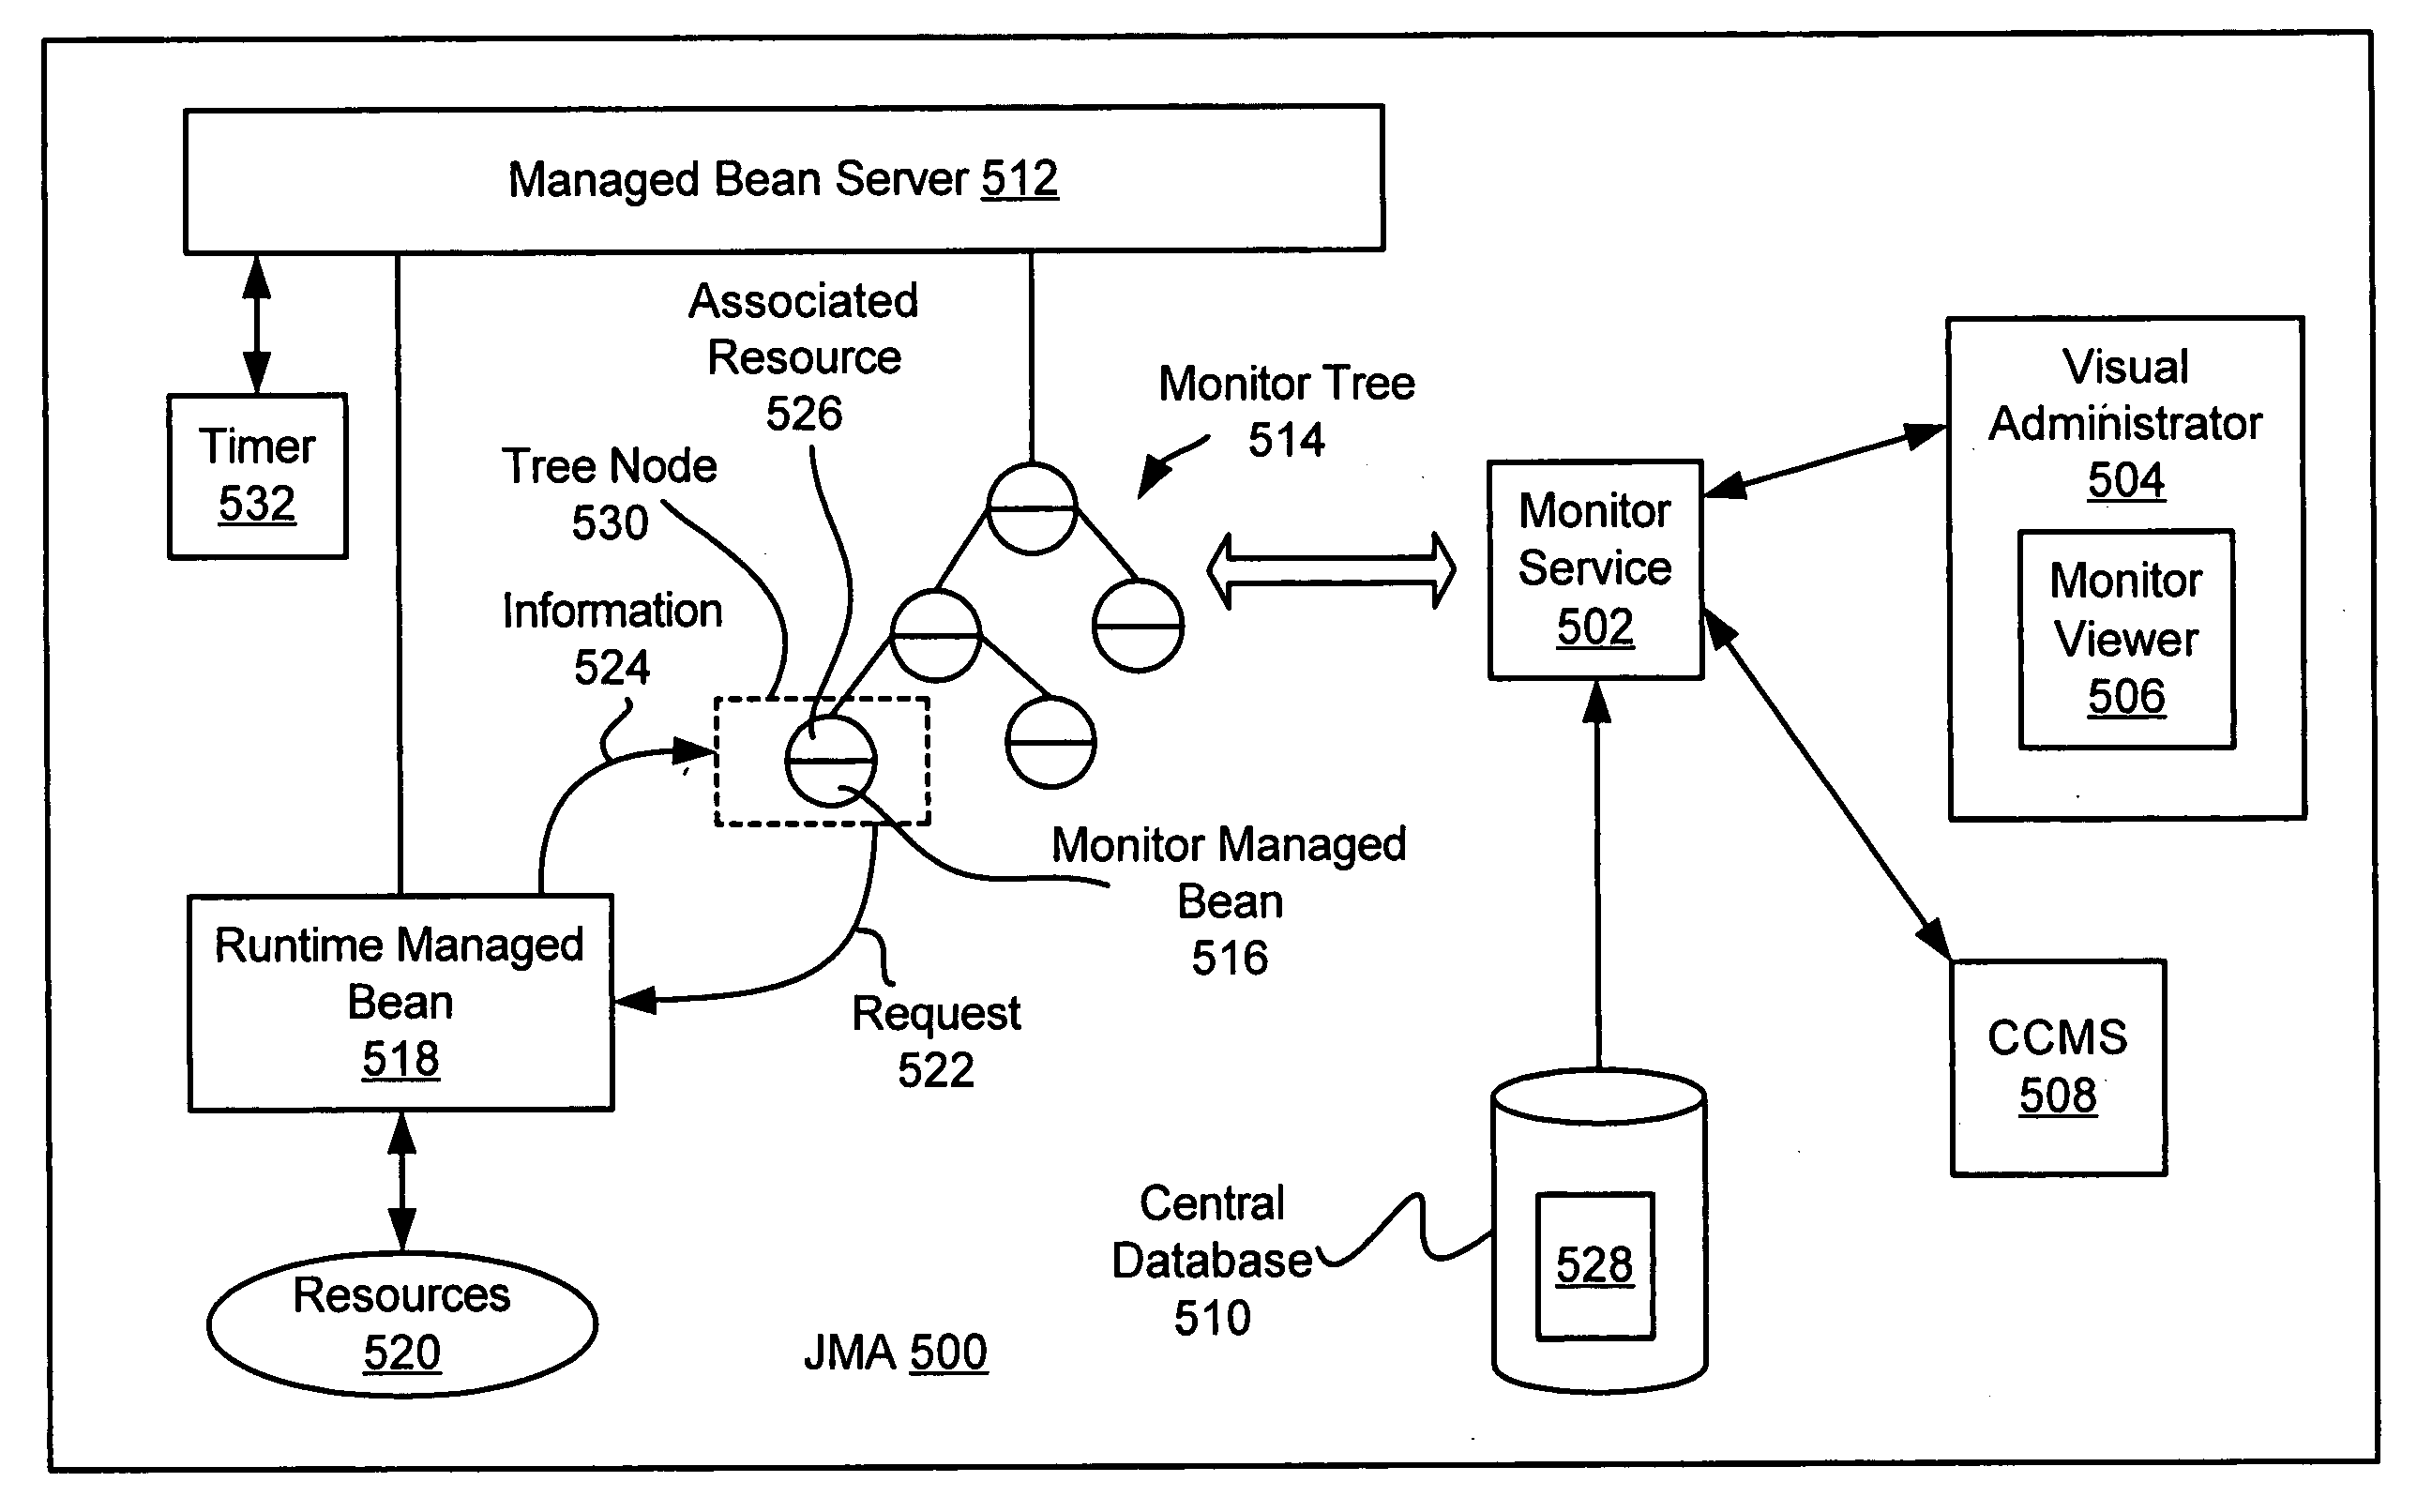 Monitor viewer for an enterprise network monitoring system